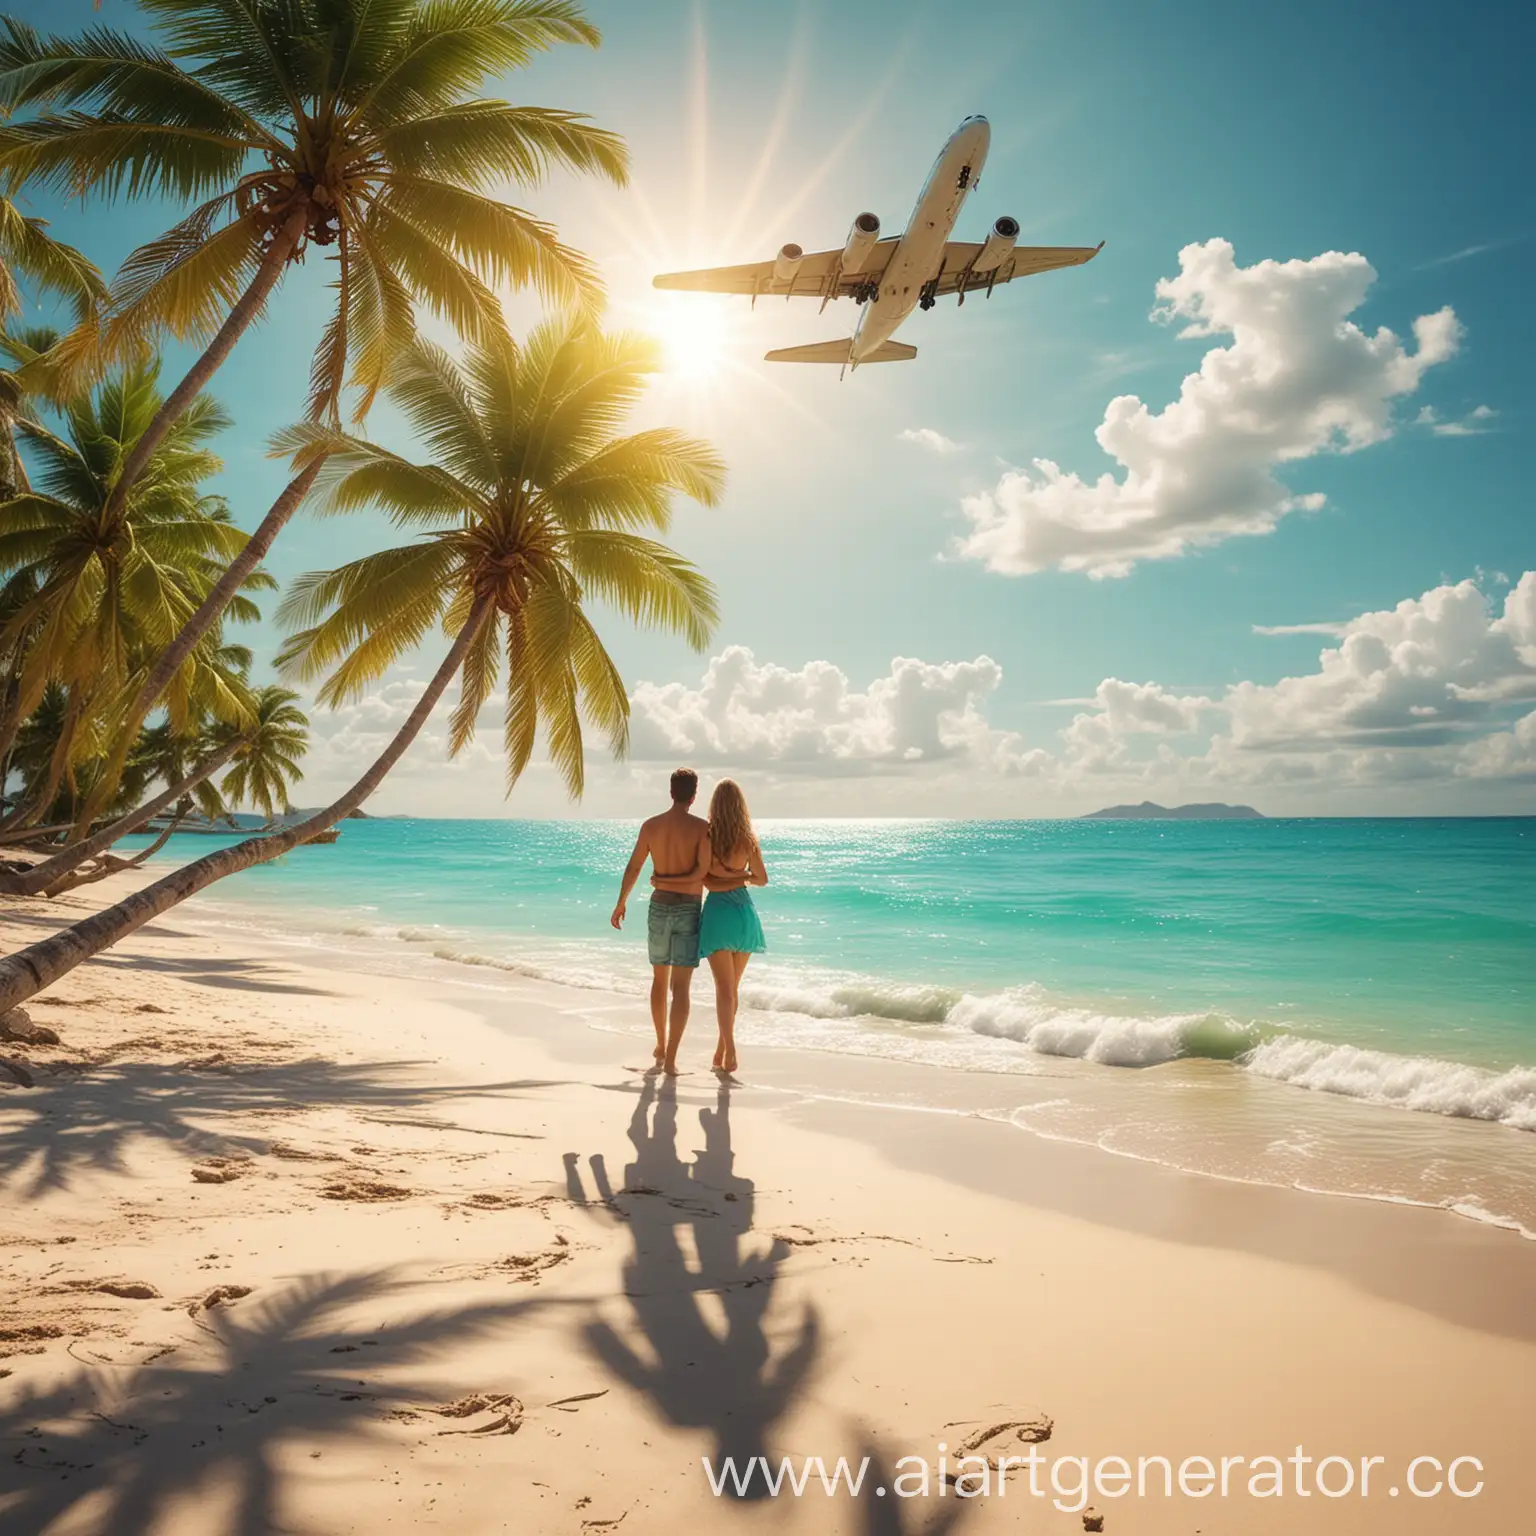 Sunny-Beach-Scene-with-Palm-Trees-and-Romantic-Couple